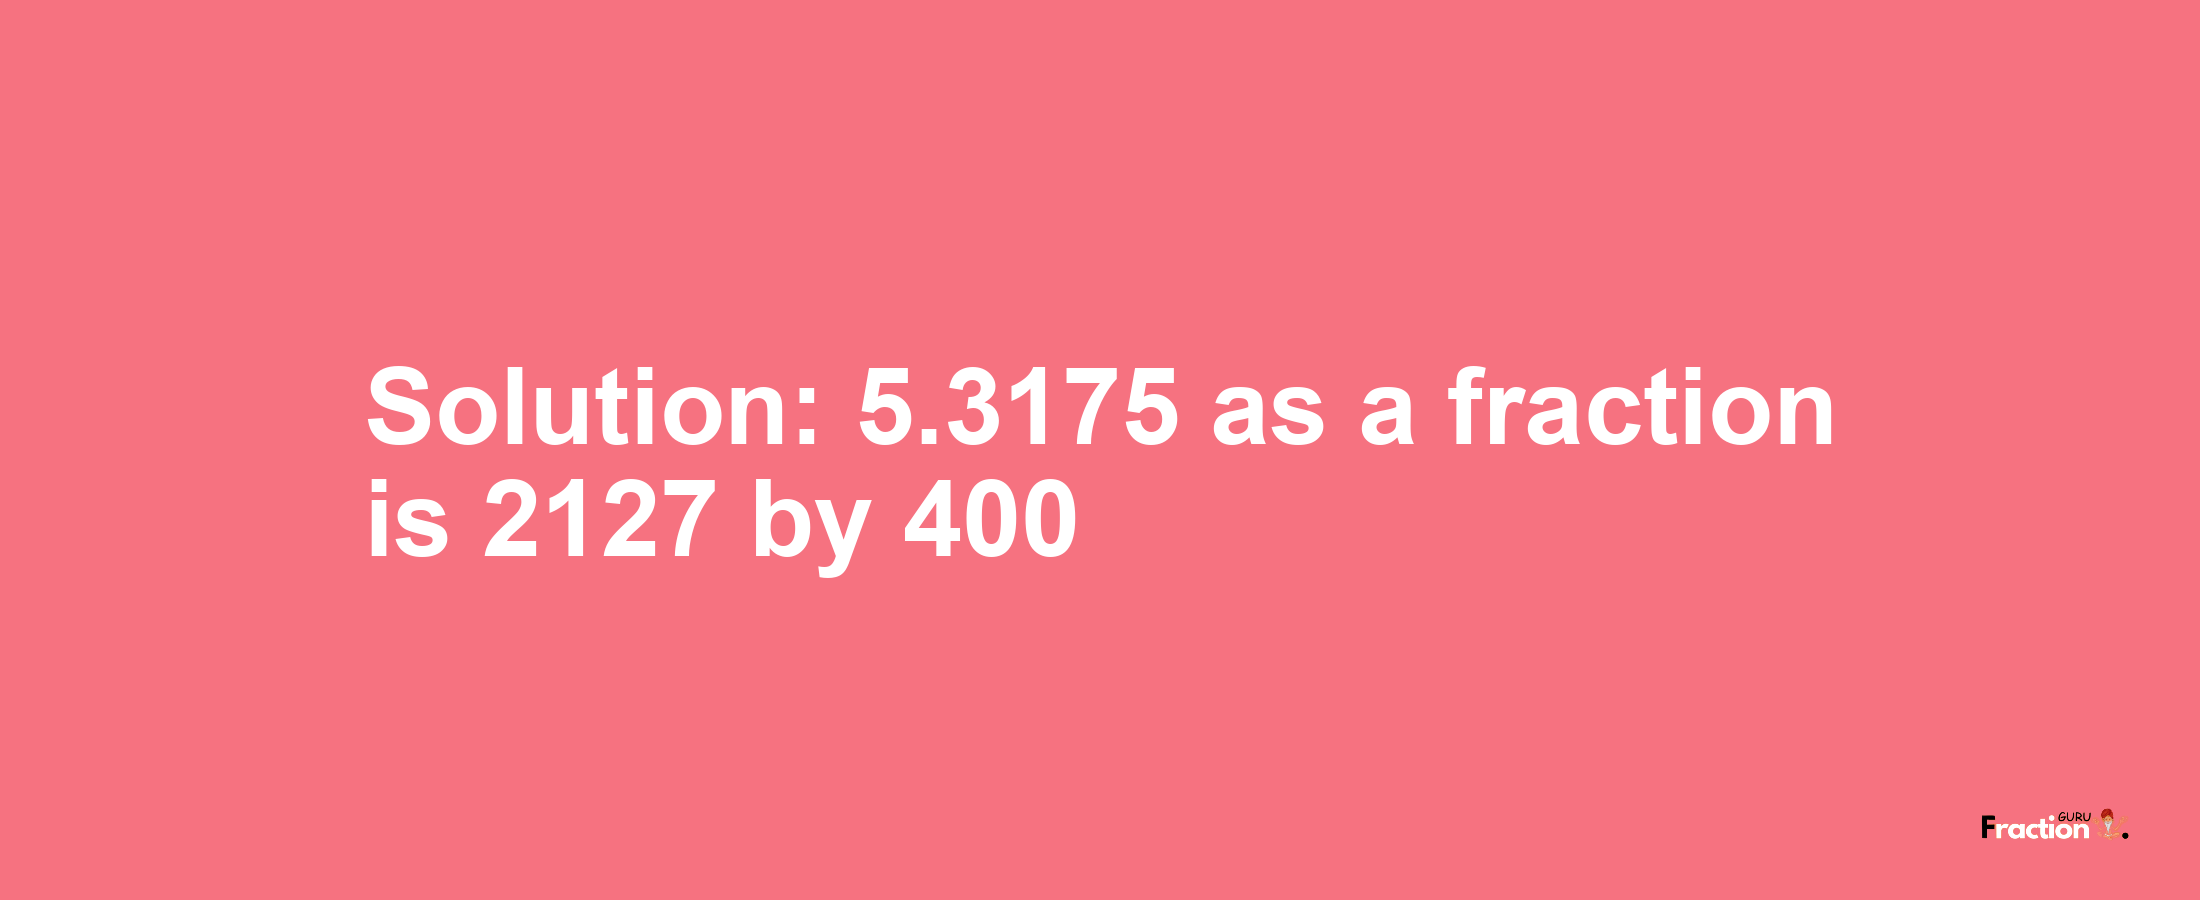 Solution:5.3175 as a fraction is 2127/400